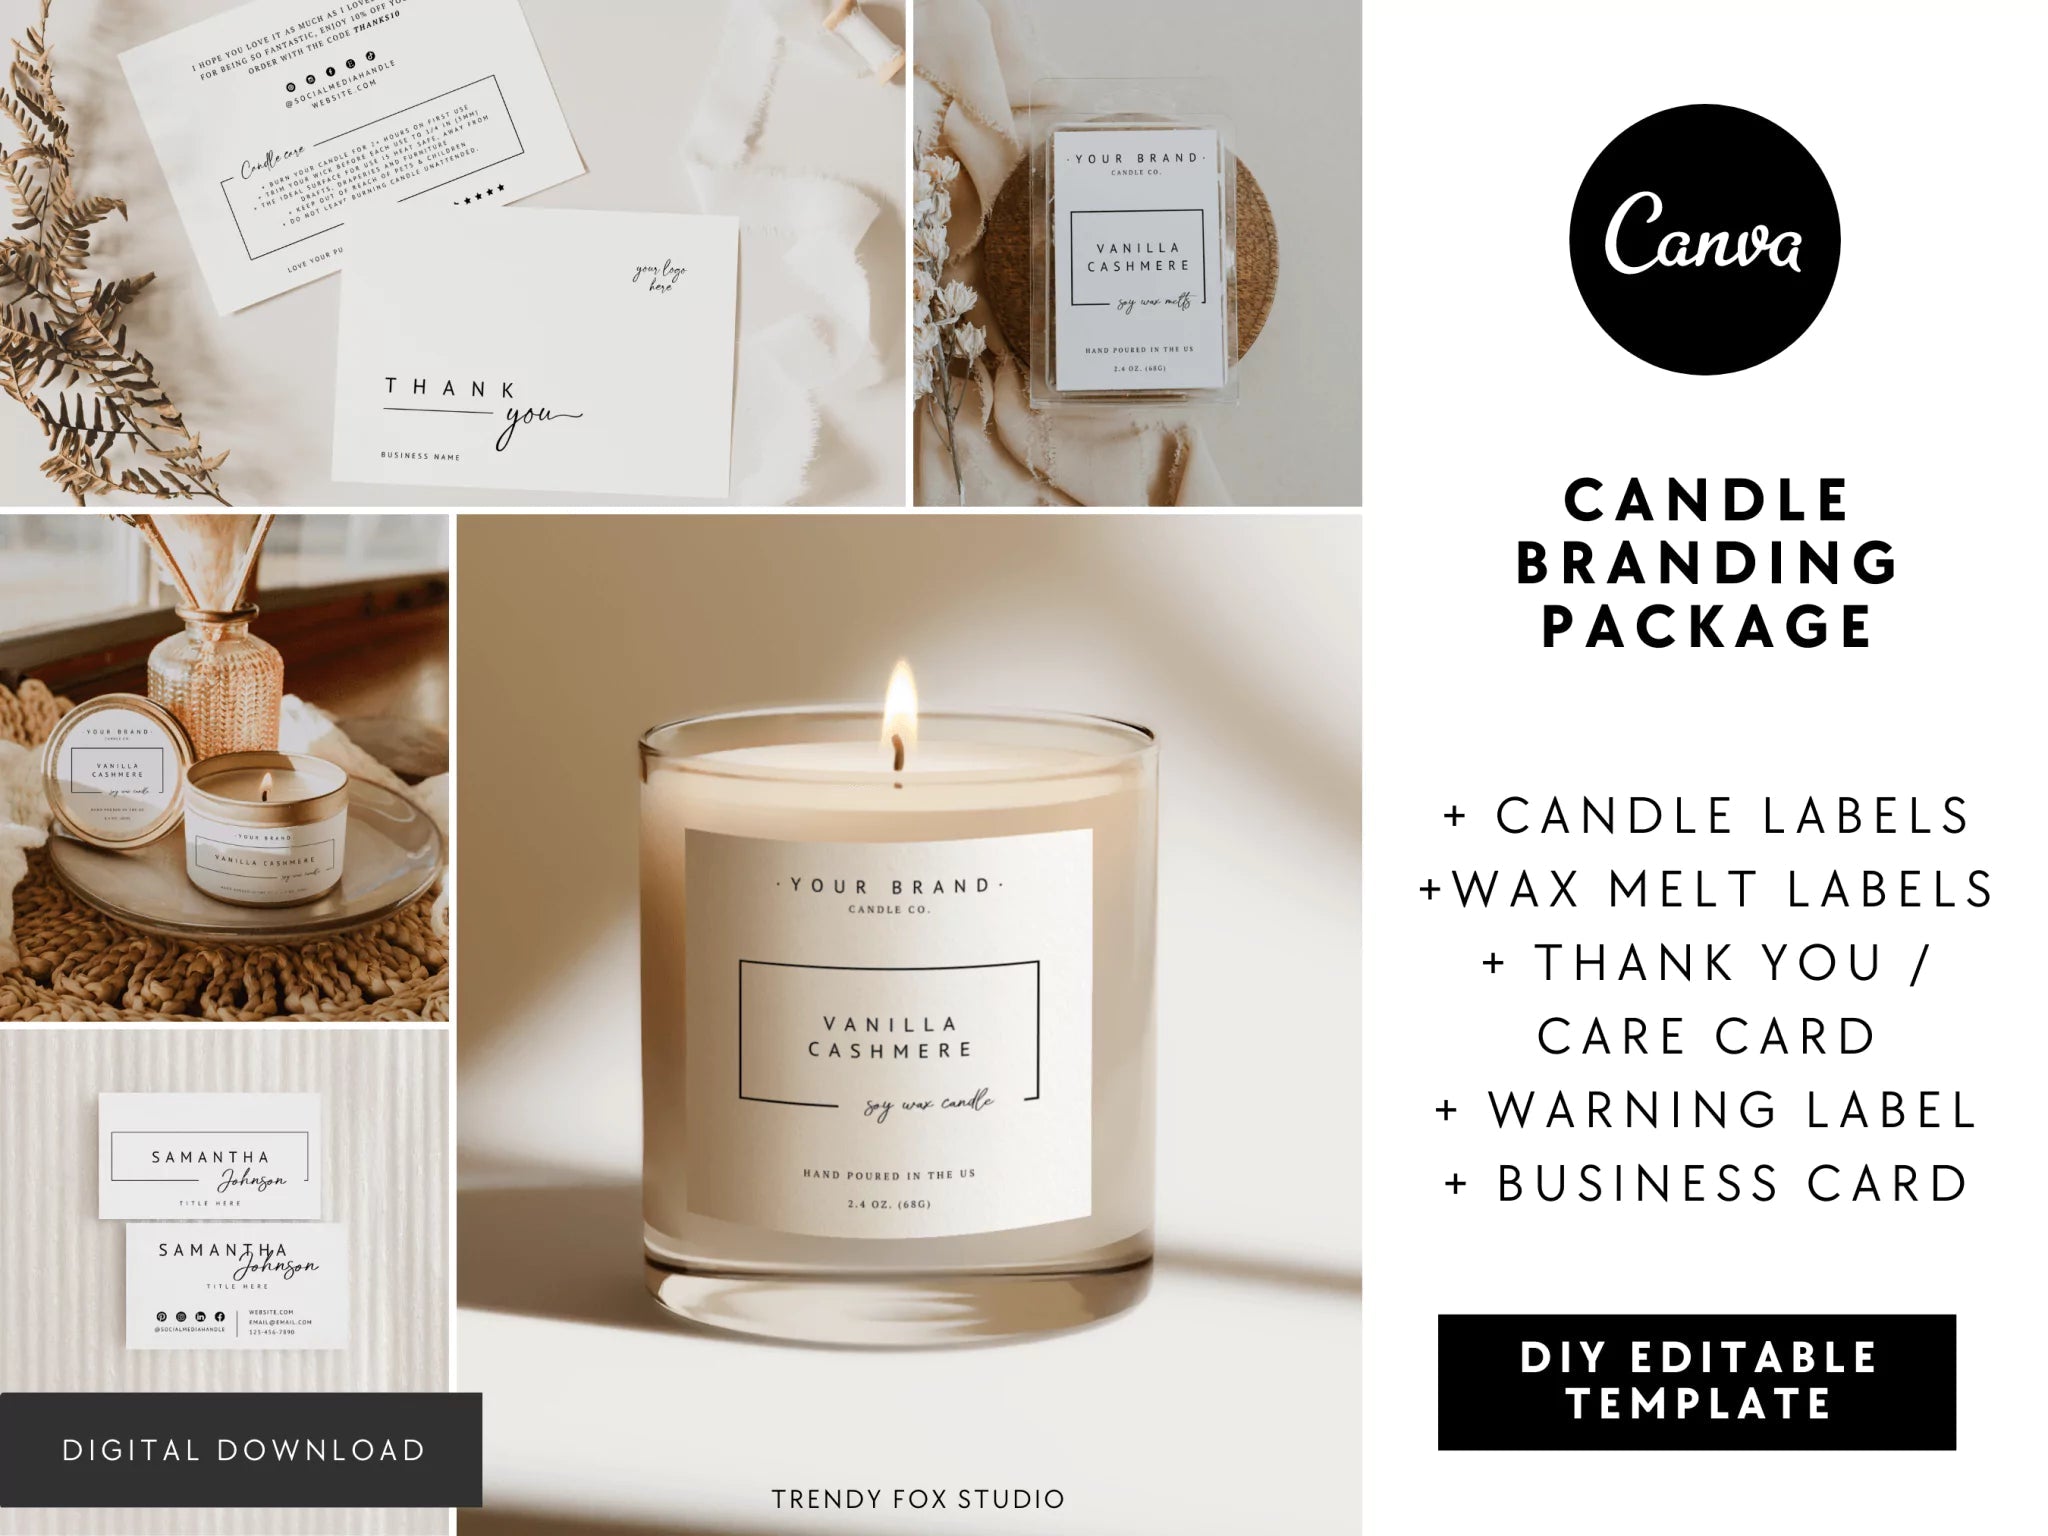 Candle and Wax Melt Business Kit